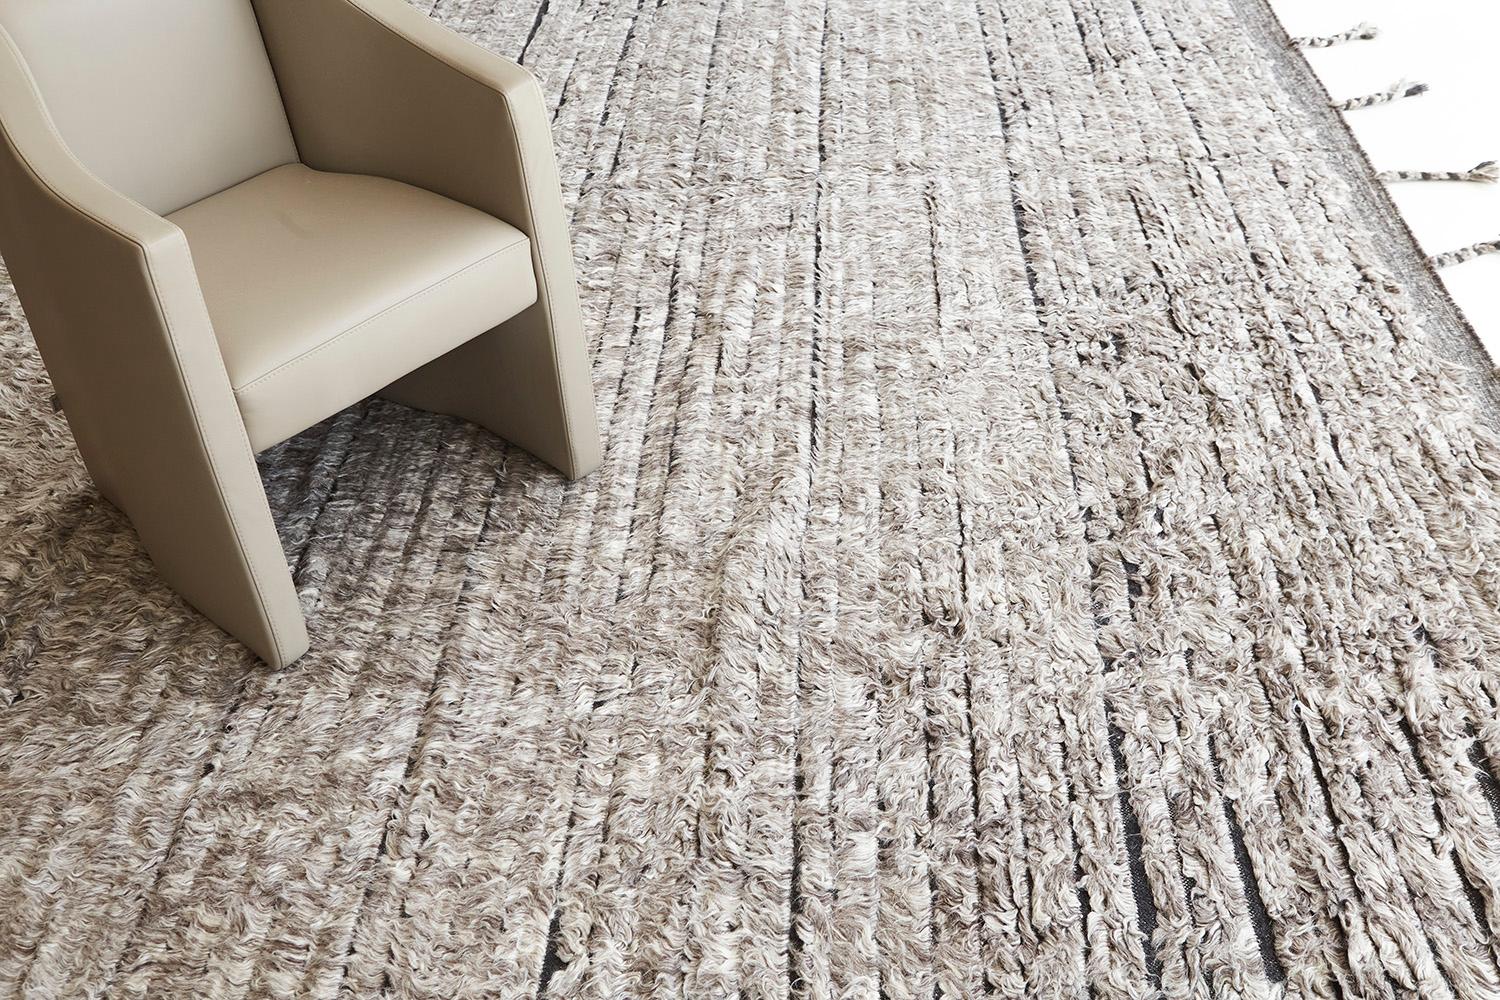 Abroshca is a handwoven luxurious wool rug with timeless embossed detailing. In addition to its perfect grayscaled flatweave, Abroshca has a beautiful shag that brings a lustrous texture and contemporary feel to one's space. The Haute Bohemian